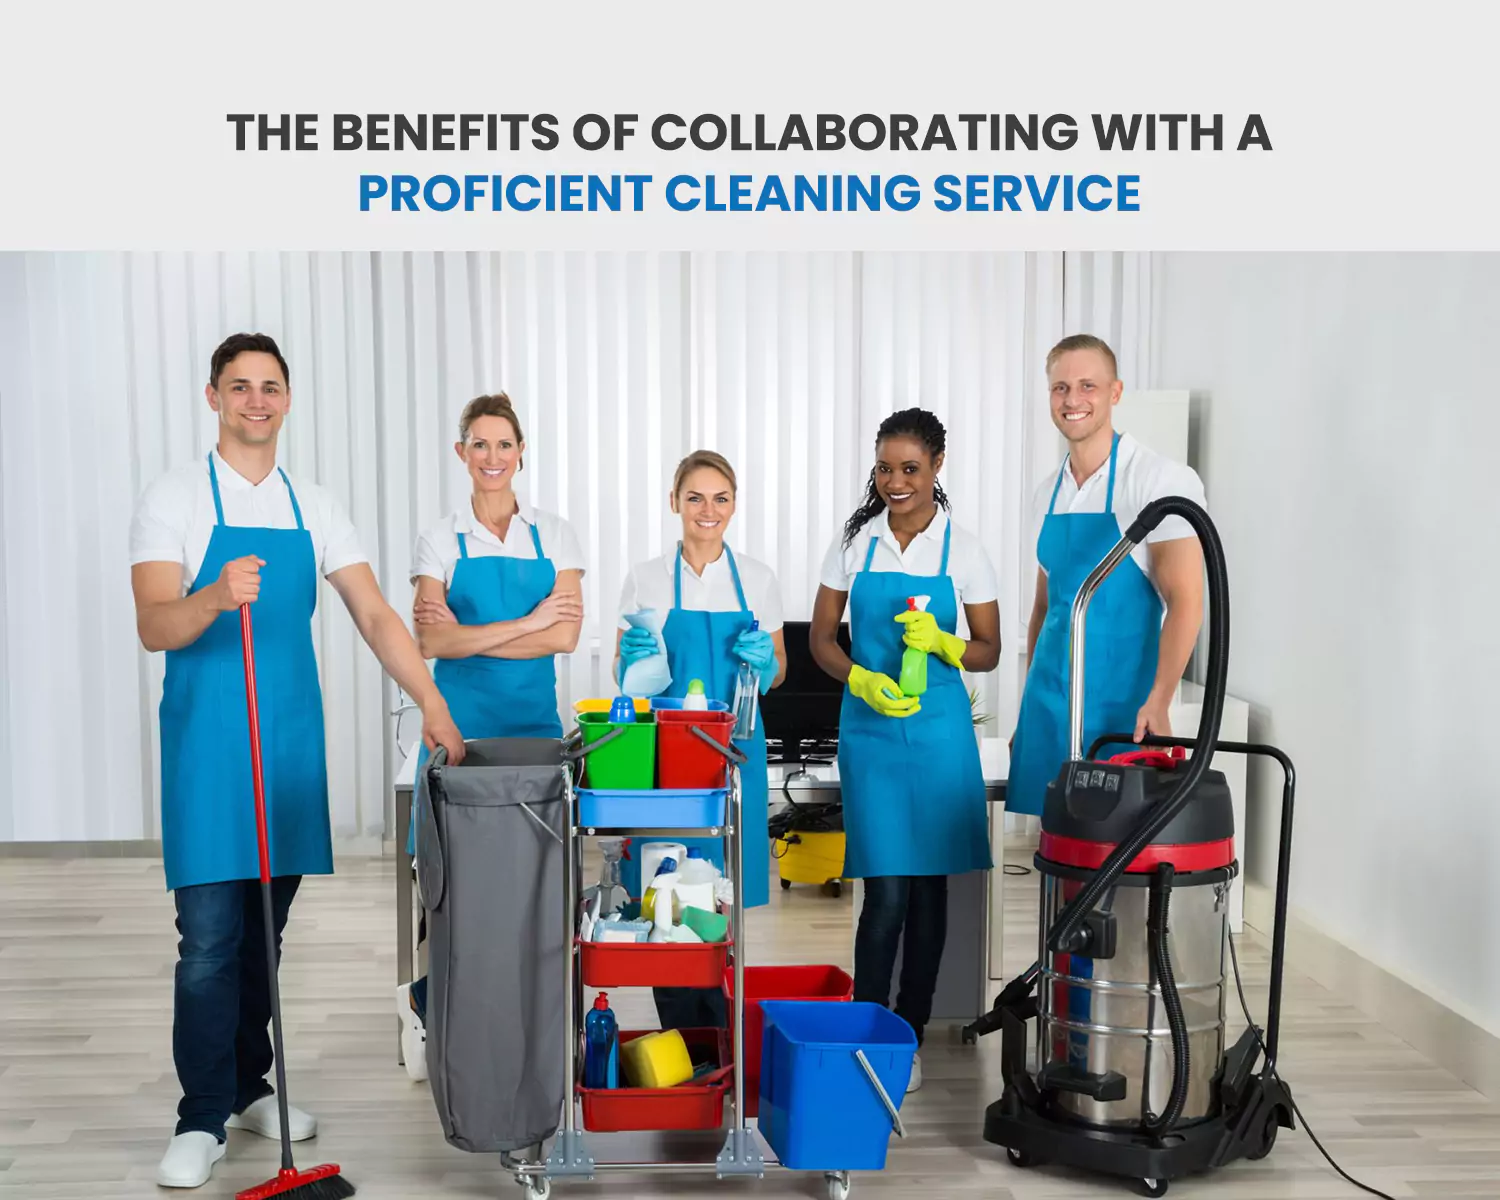 The Benefits of Collaborating with a Proficient Cleaning Service